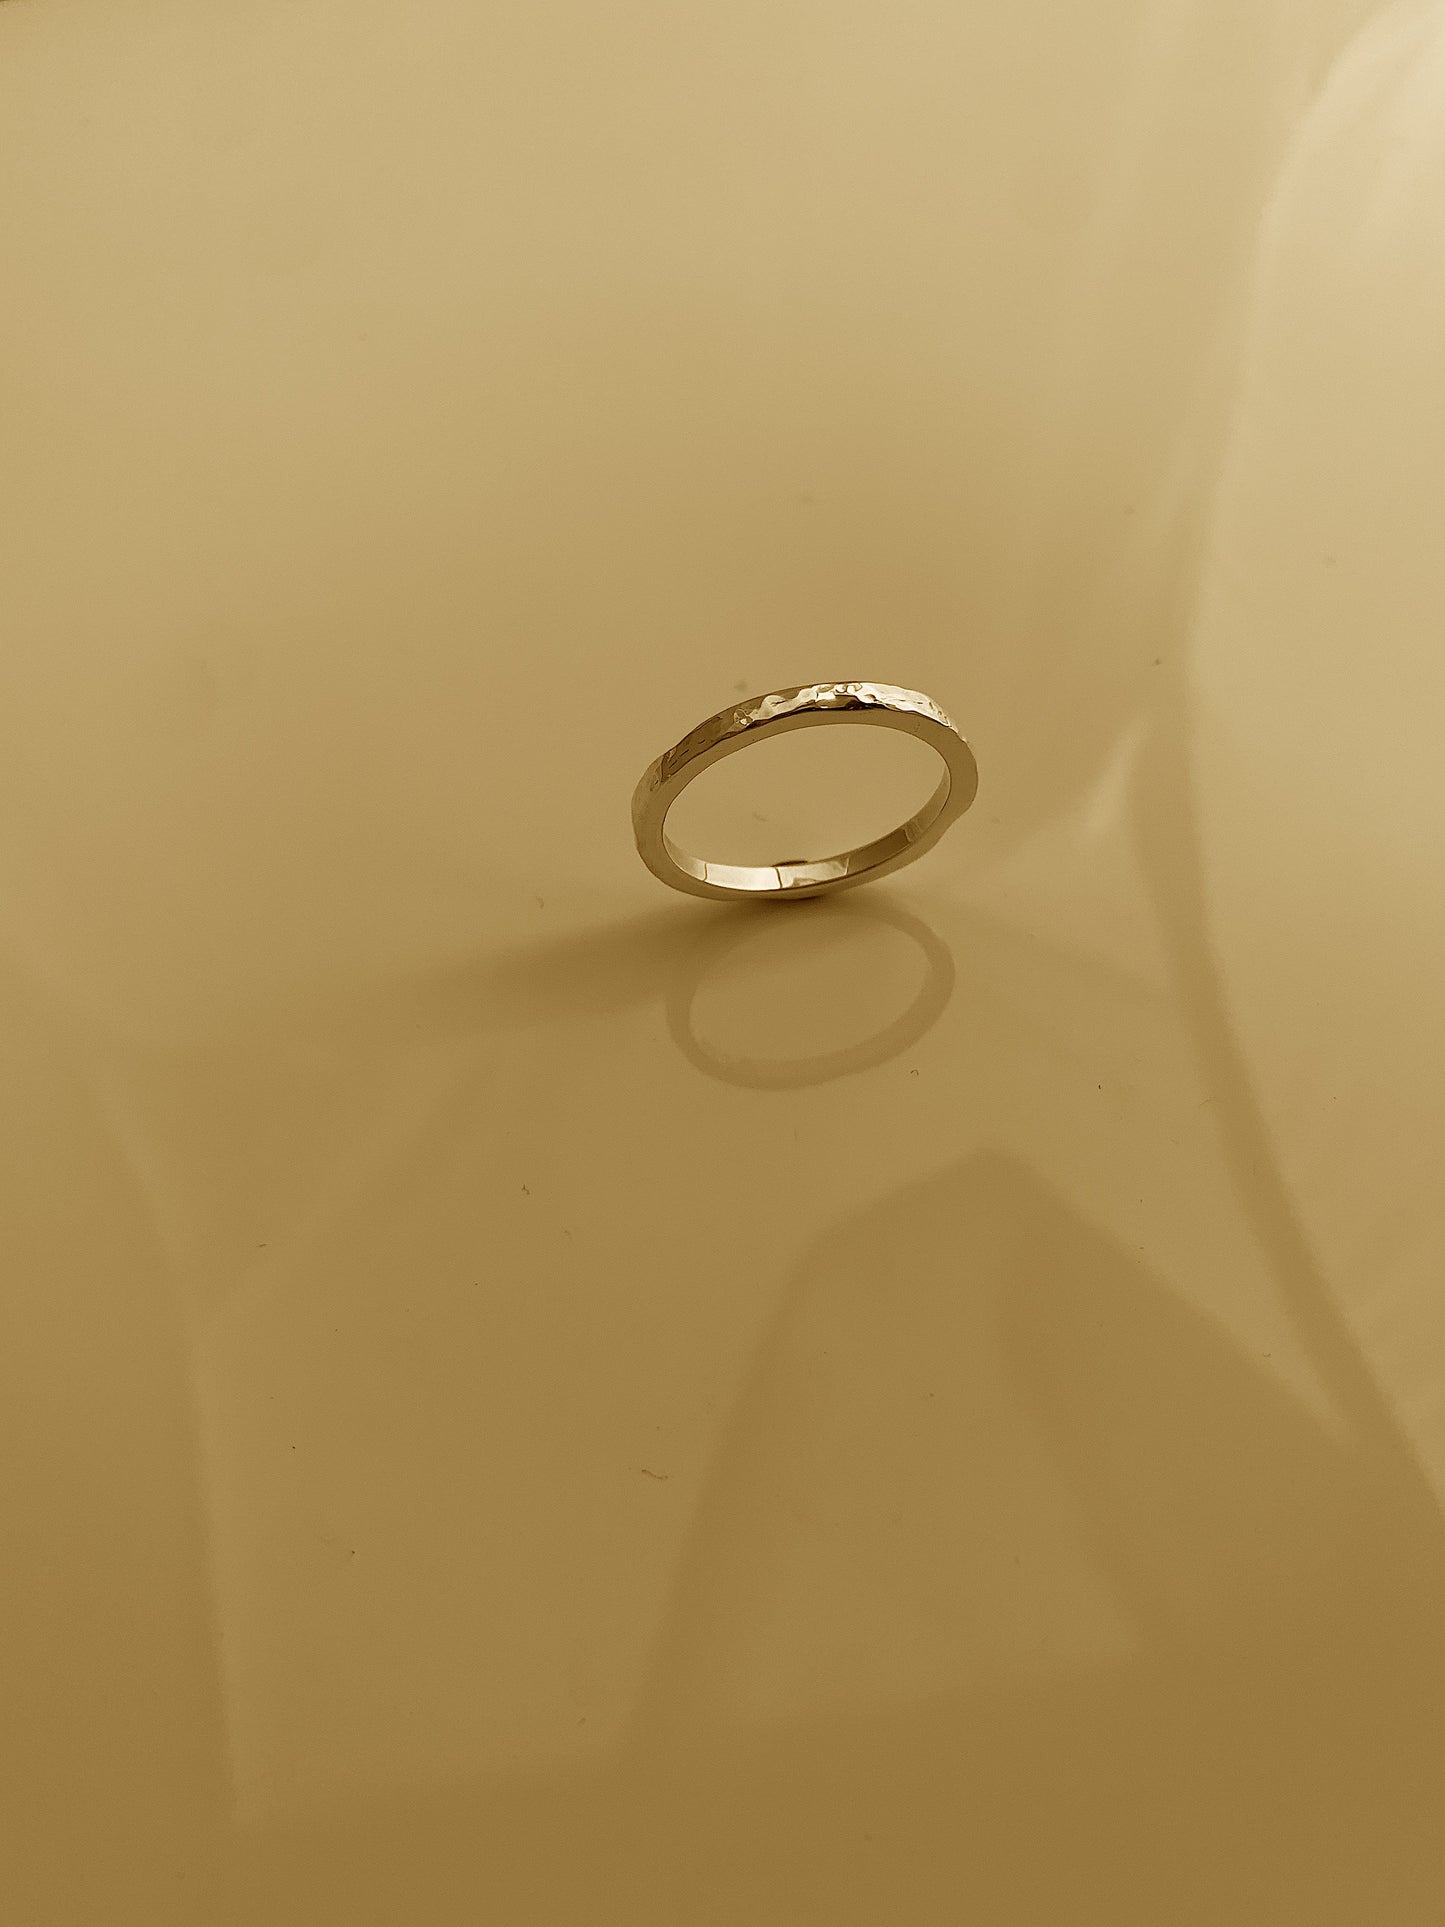 The "Formless' Ring in Gold